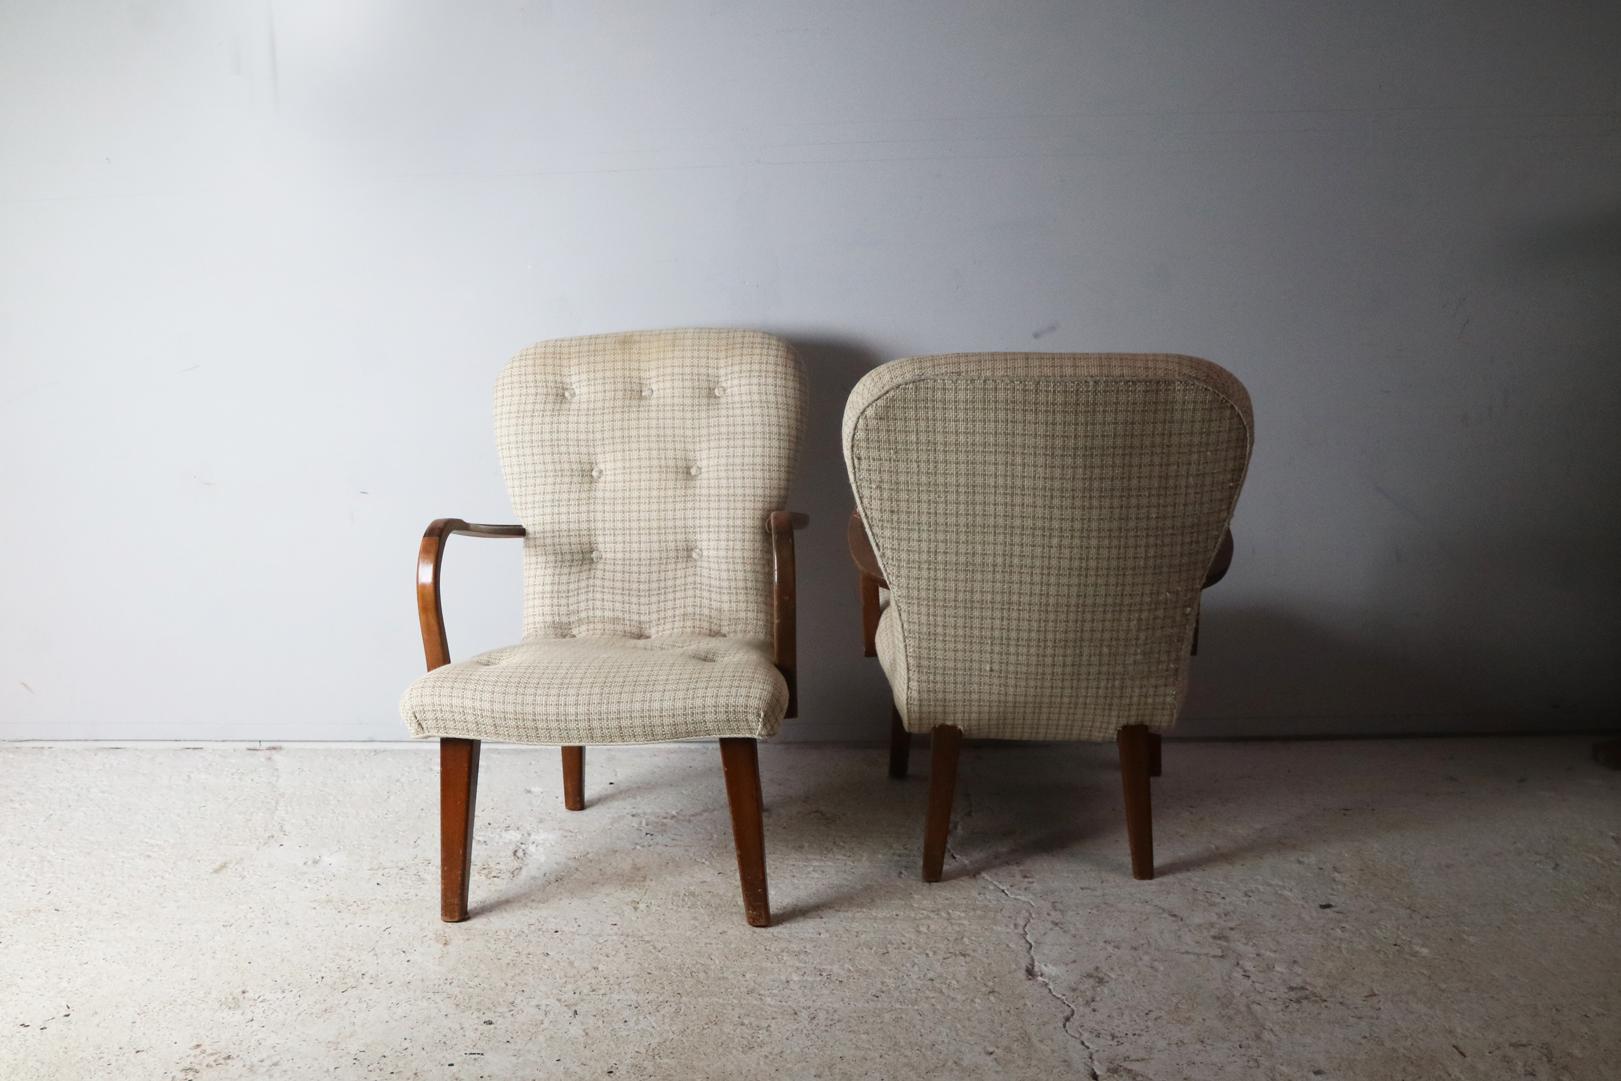 Stunning pair of midcentury chairs. The upholstery is original and in superb condition. The woolen fabric is off-white with a check pattern and button detailing. The elegant curved arms are stained beech.

Happy to sell individually.
The price